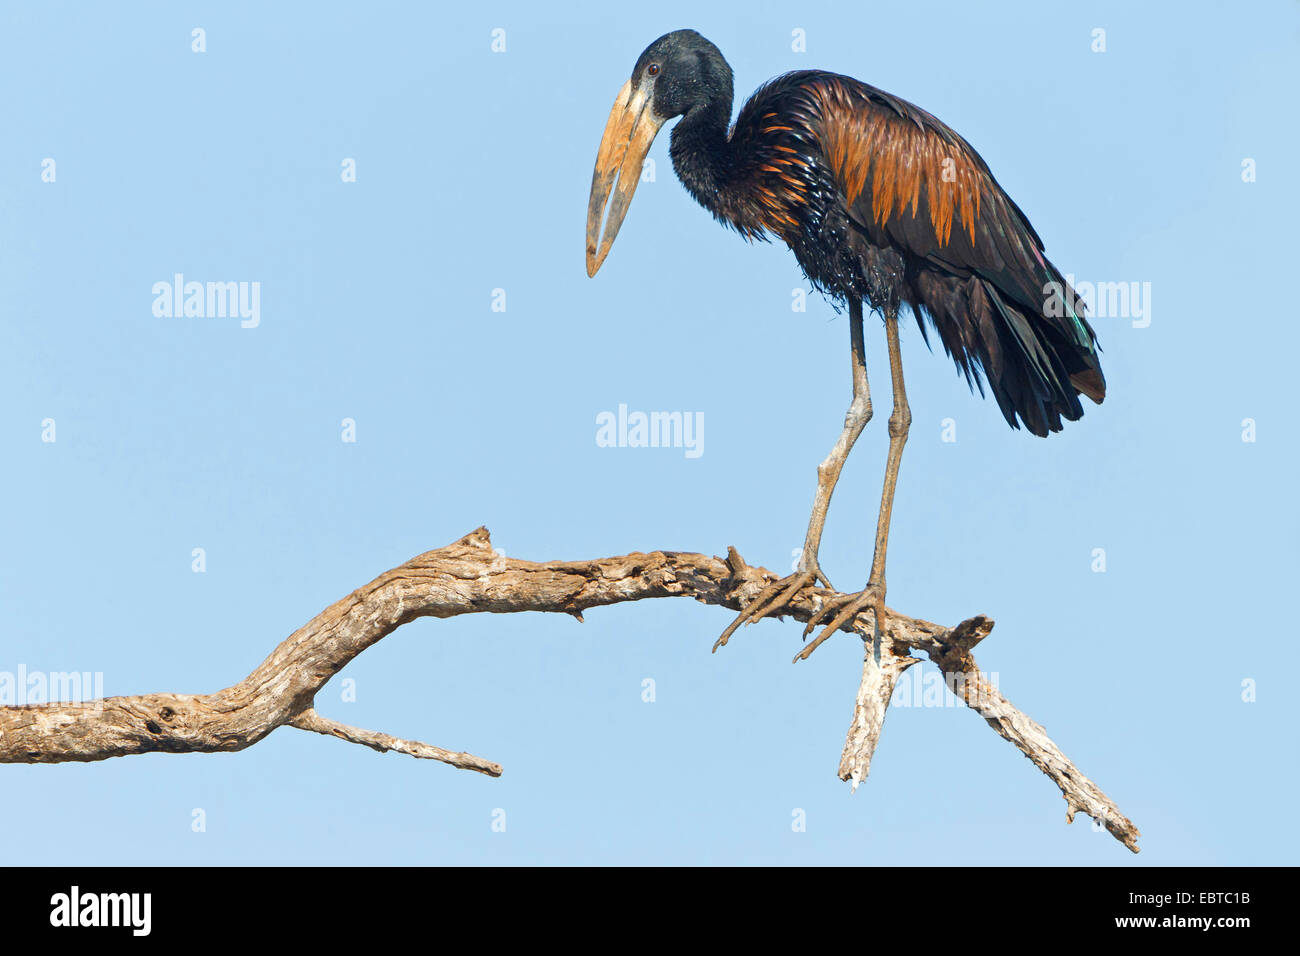 African open-bill stork (Anastomus lamelligerus), sitting on a dry branch, South Africa, Krueger National Park Stock Photo